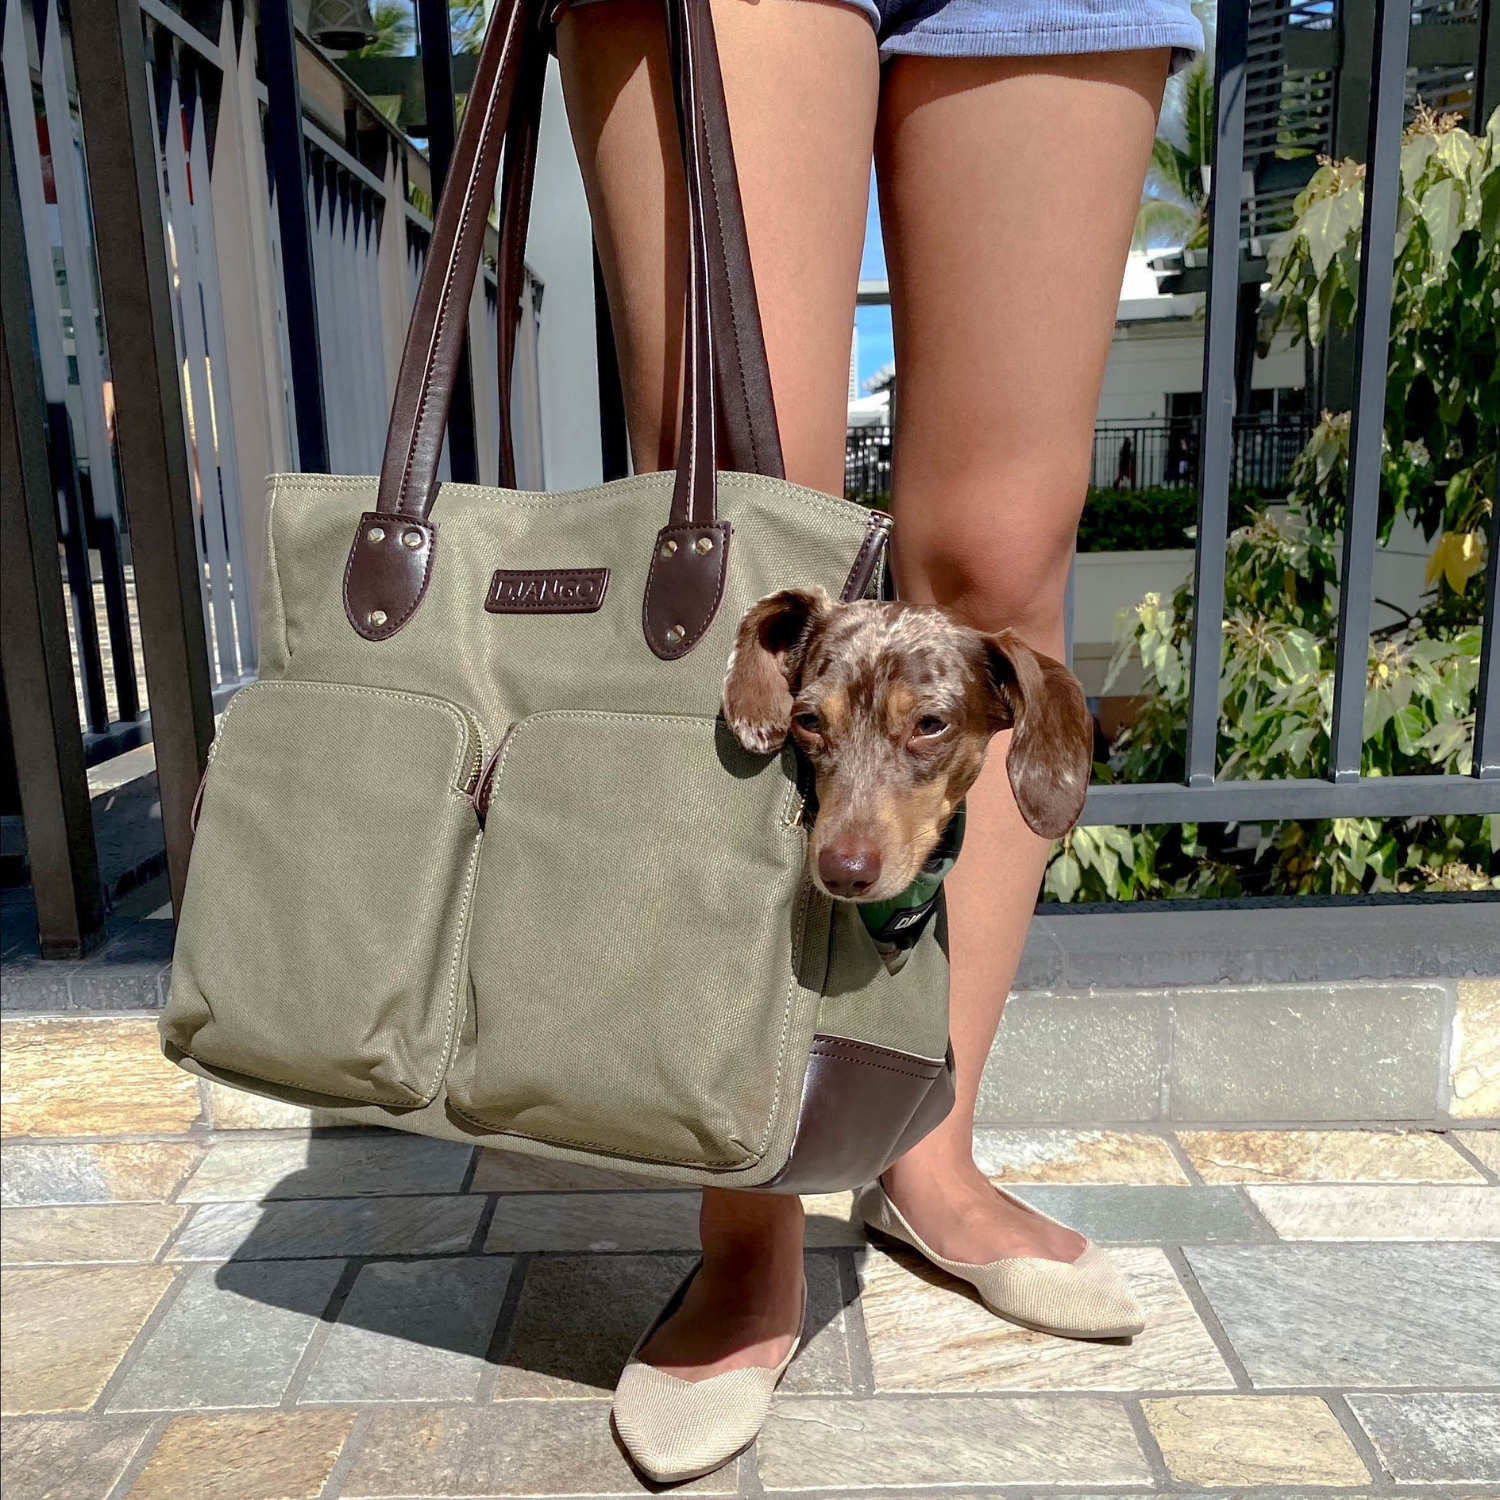 DJANGO Dog Carrier Bag - Waxed Canvas and Leather Dog Purse and Pet Tote in Olive Green - djangobrand.com